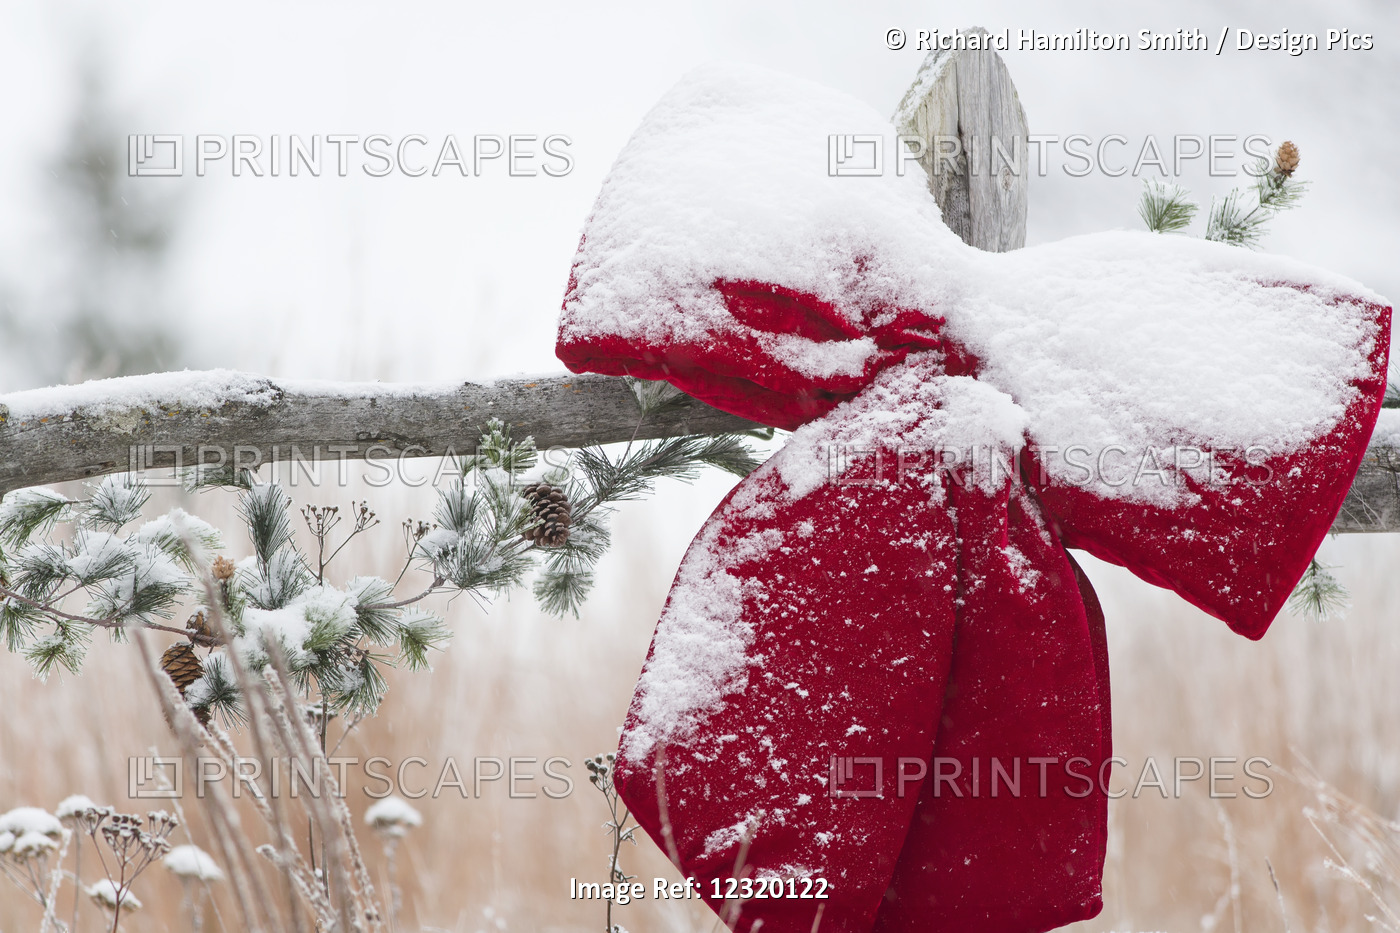 Fresh Snow On Holiday Bow And Decorations On Fence Post, Christmas Season; ...